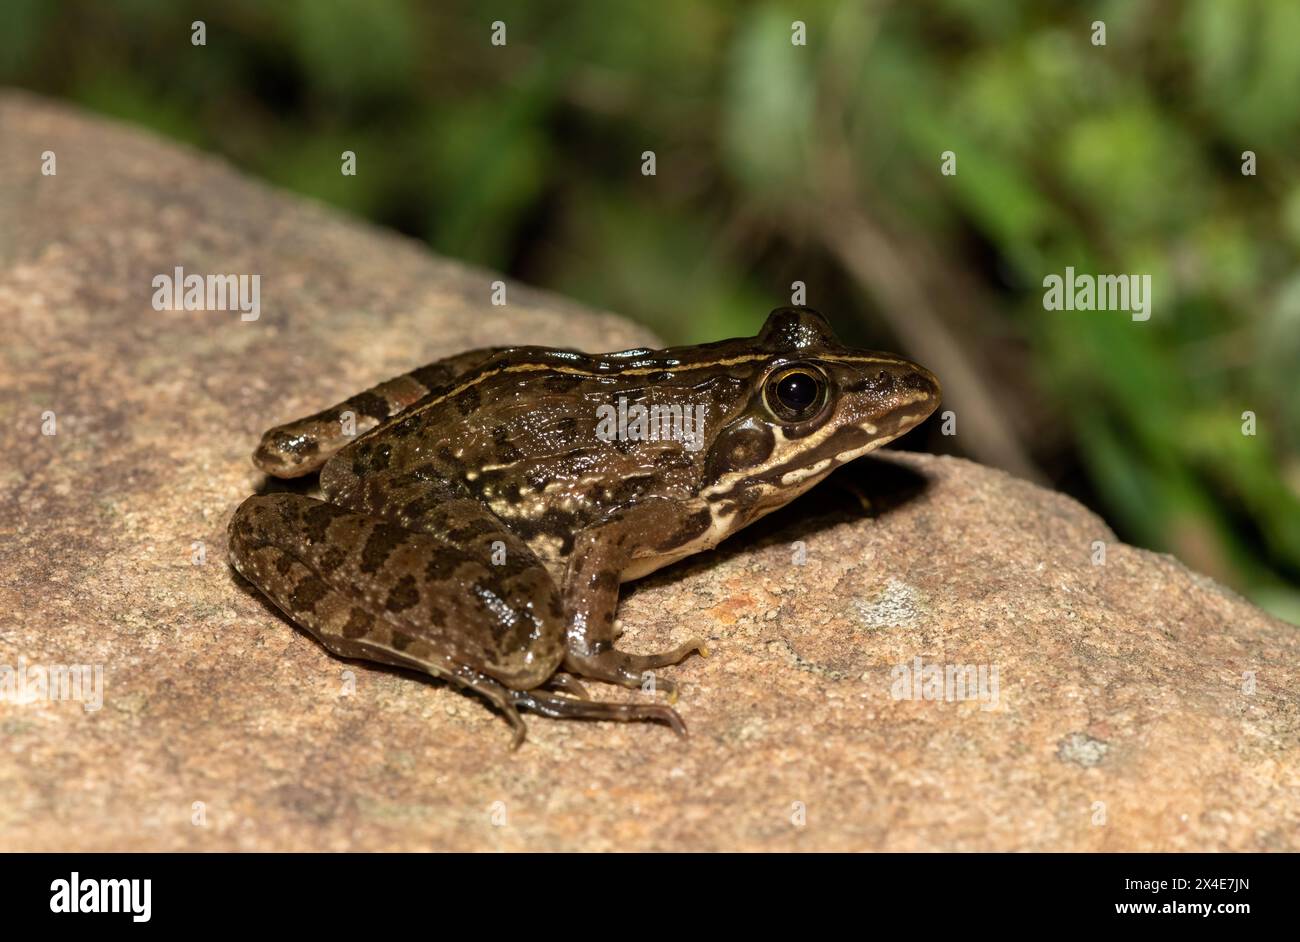 A beautiful common river frog (Amietia angolensis) in the wild Stock Photo